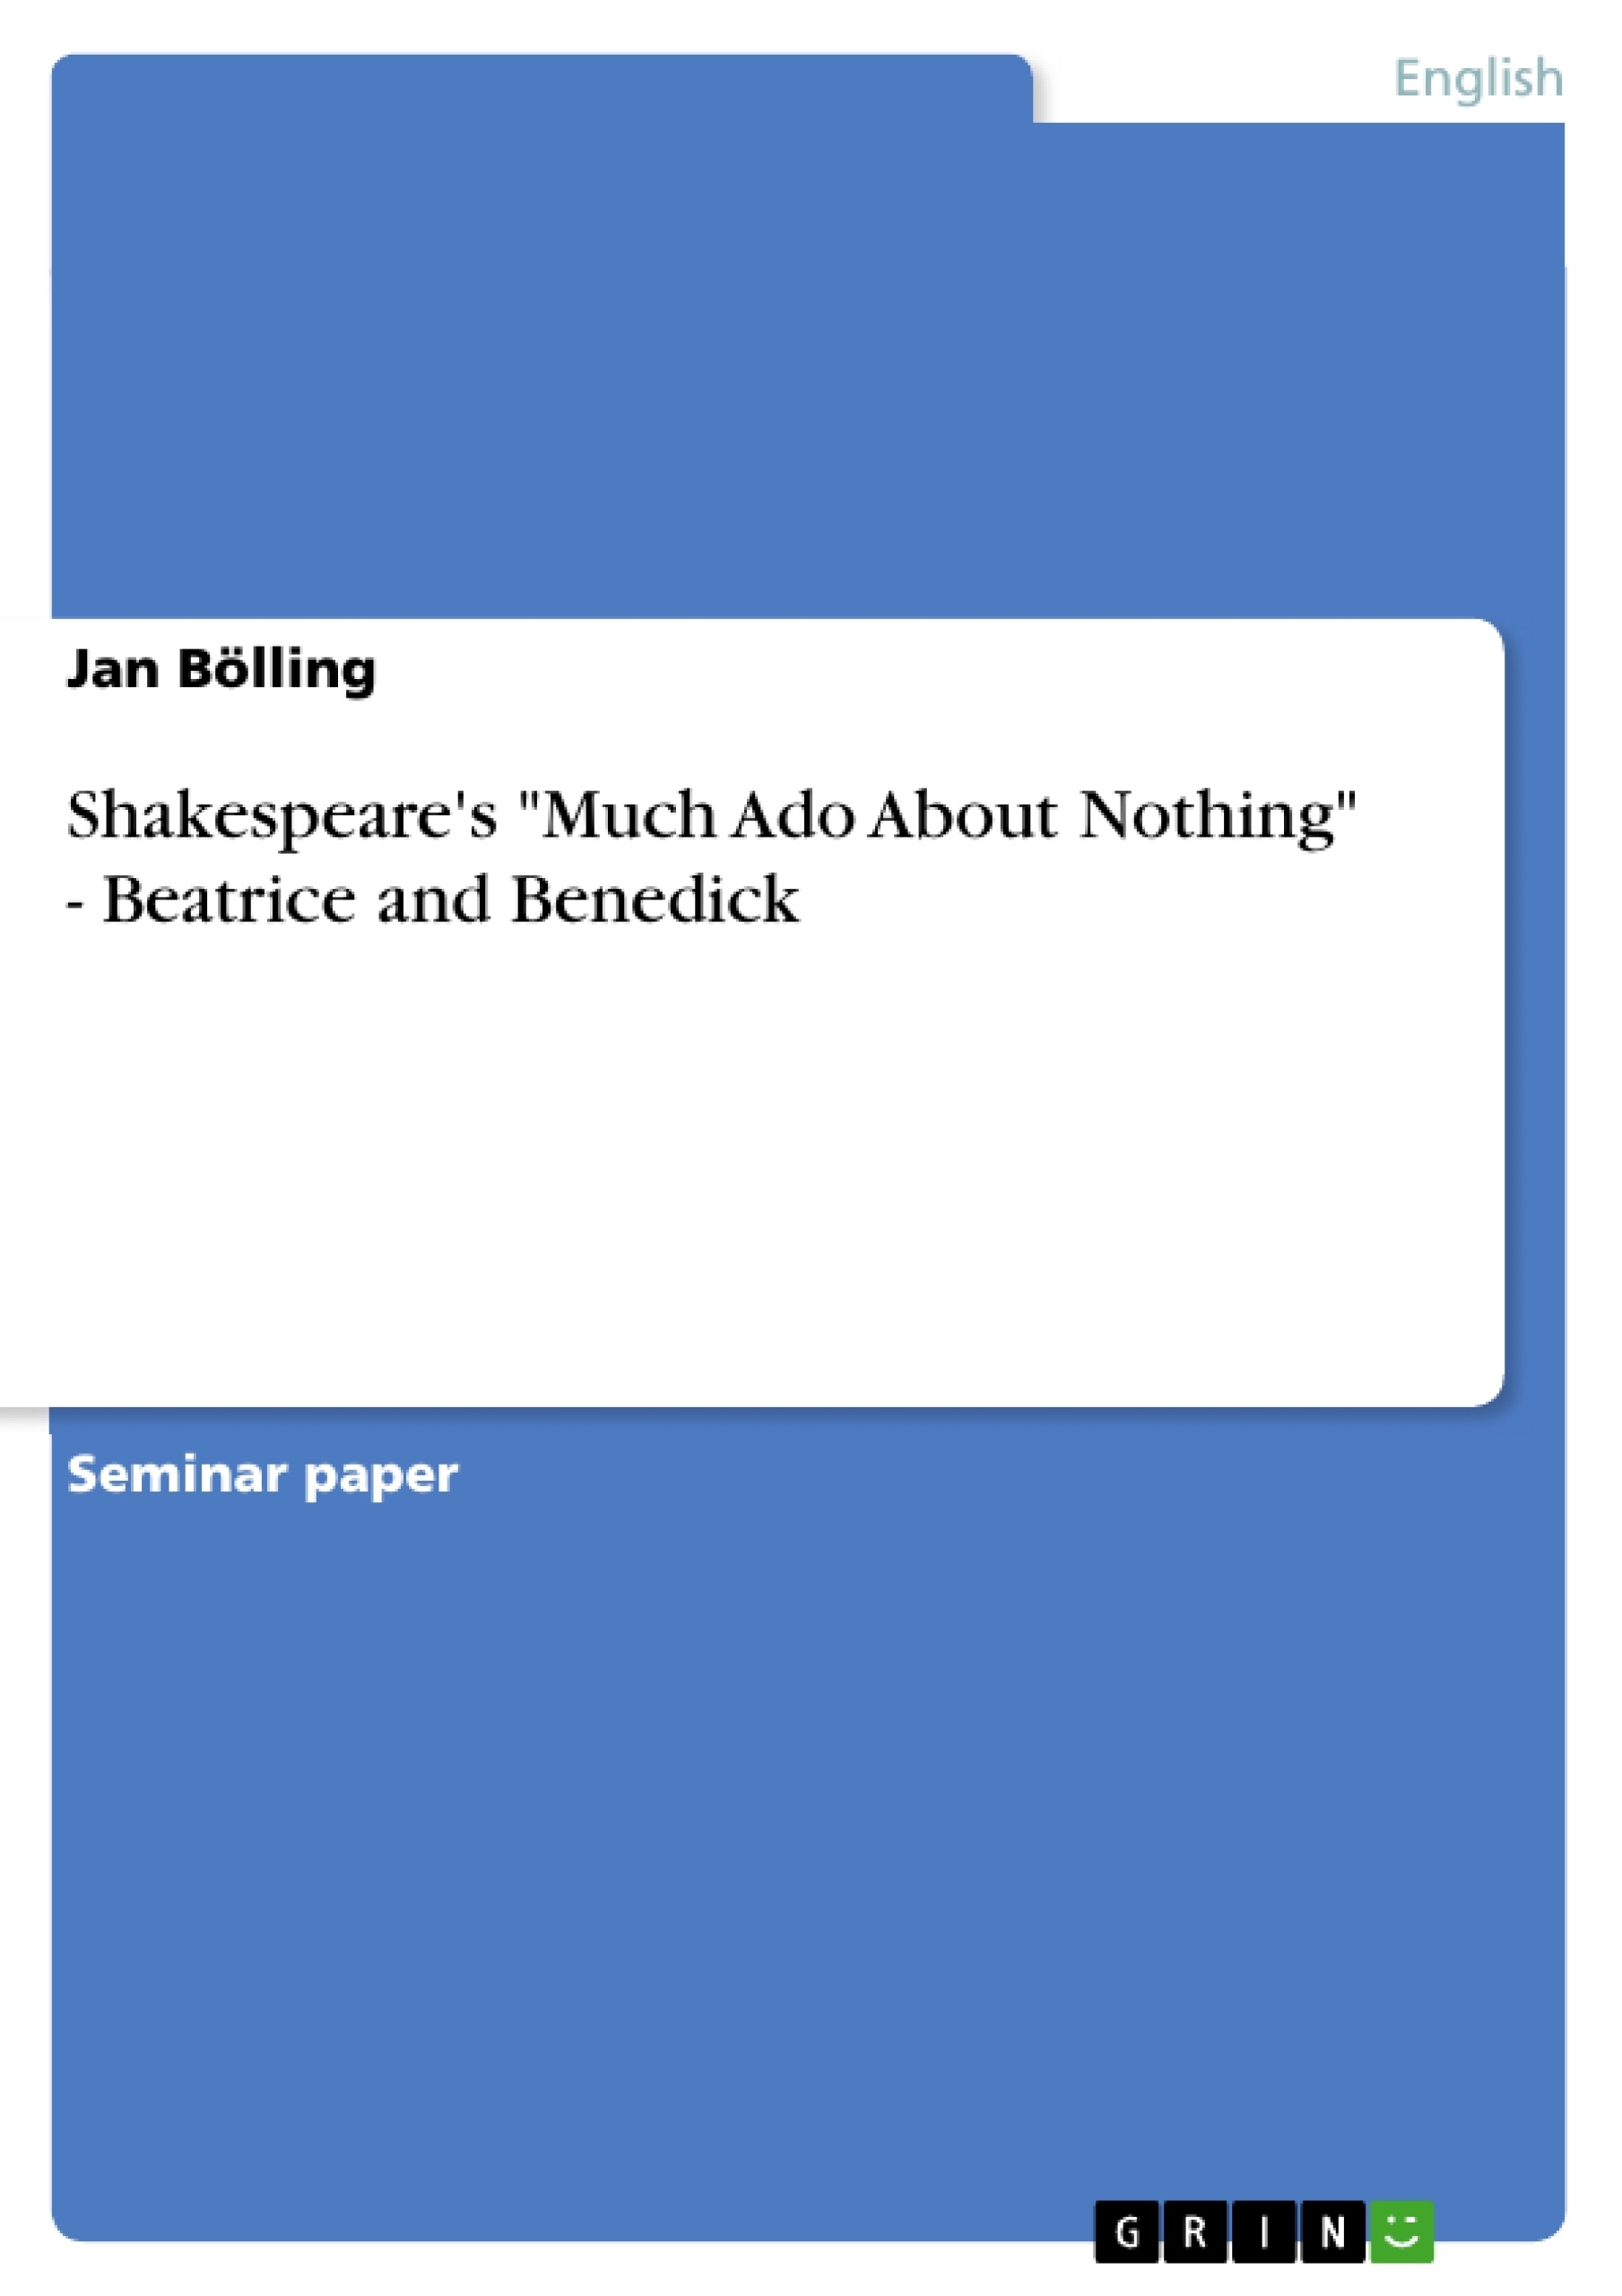 Título: Shakespeare's "Much Ado About Nothing" - Beatrice and Benedick